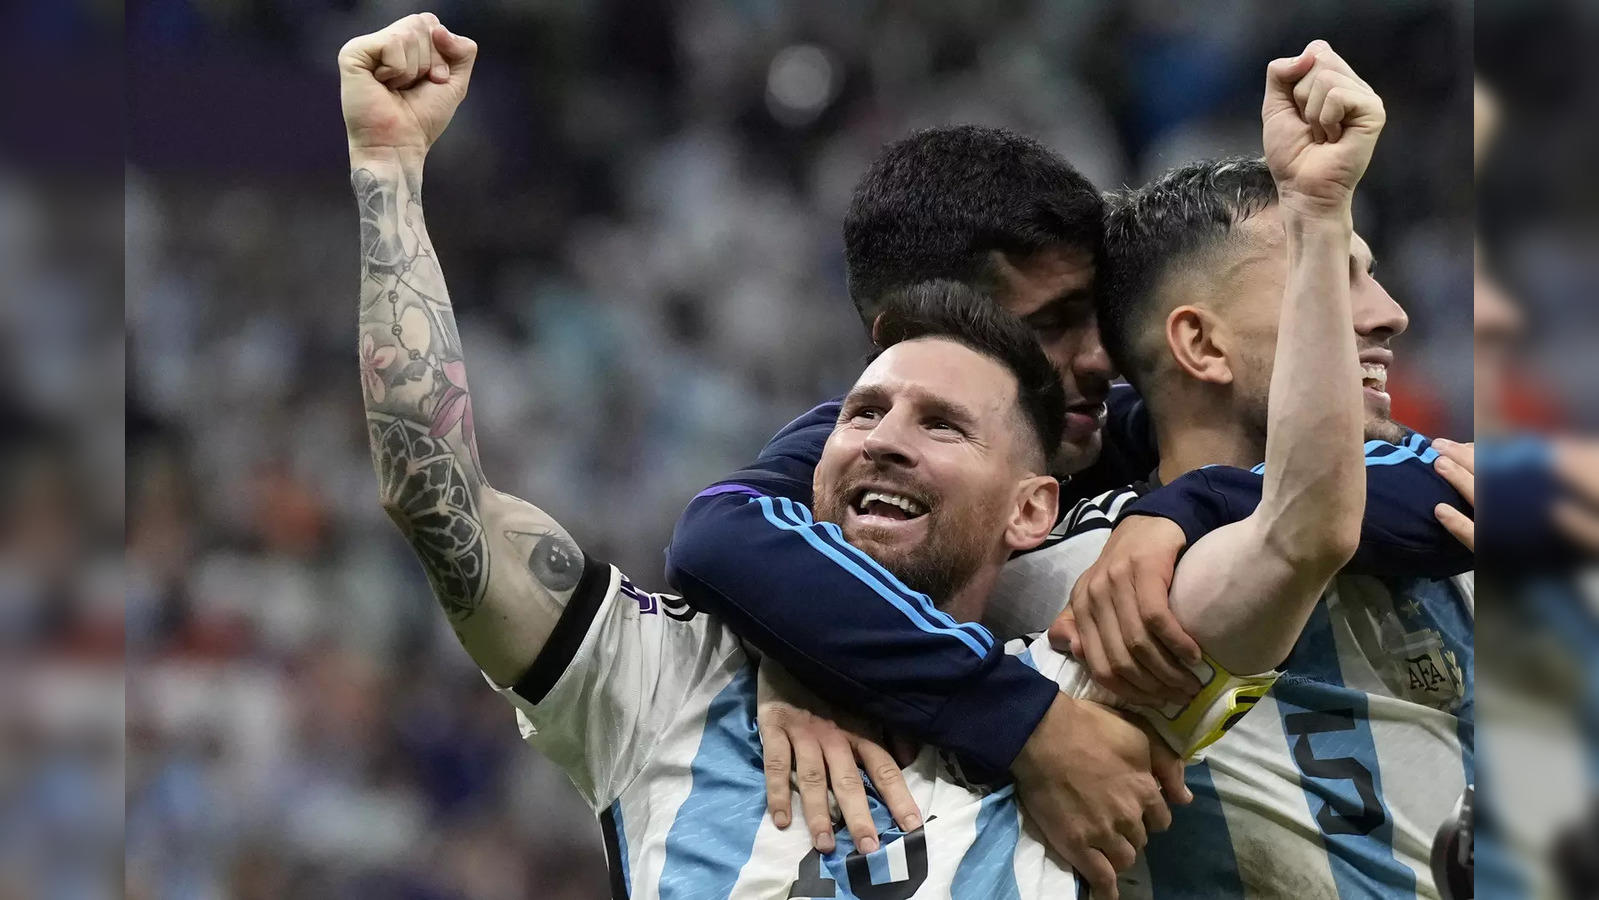 I am not going to retire': Leo Messi after Argentina's World Cup